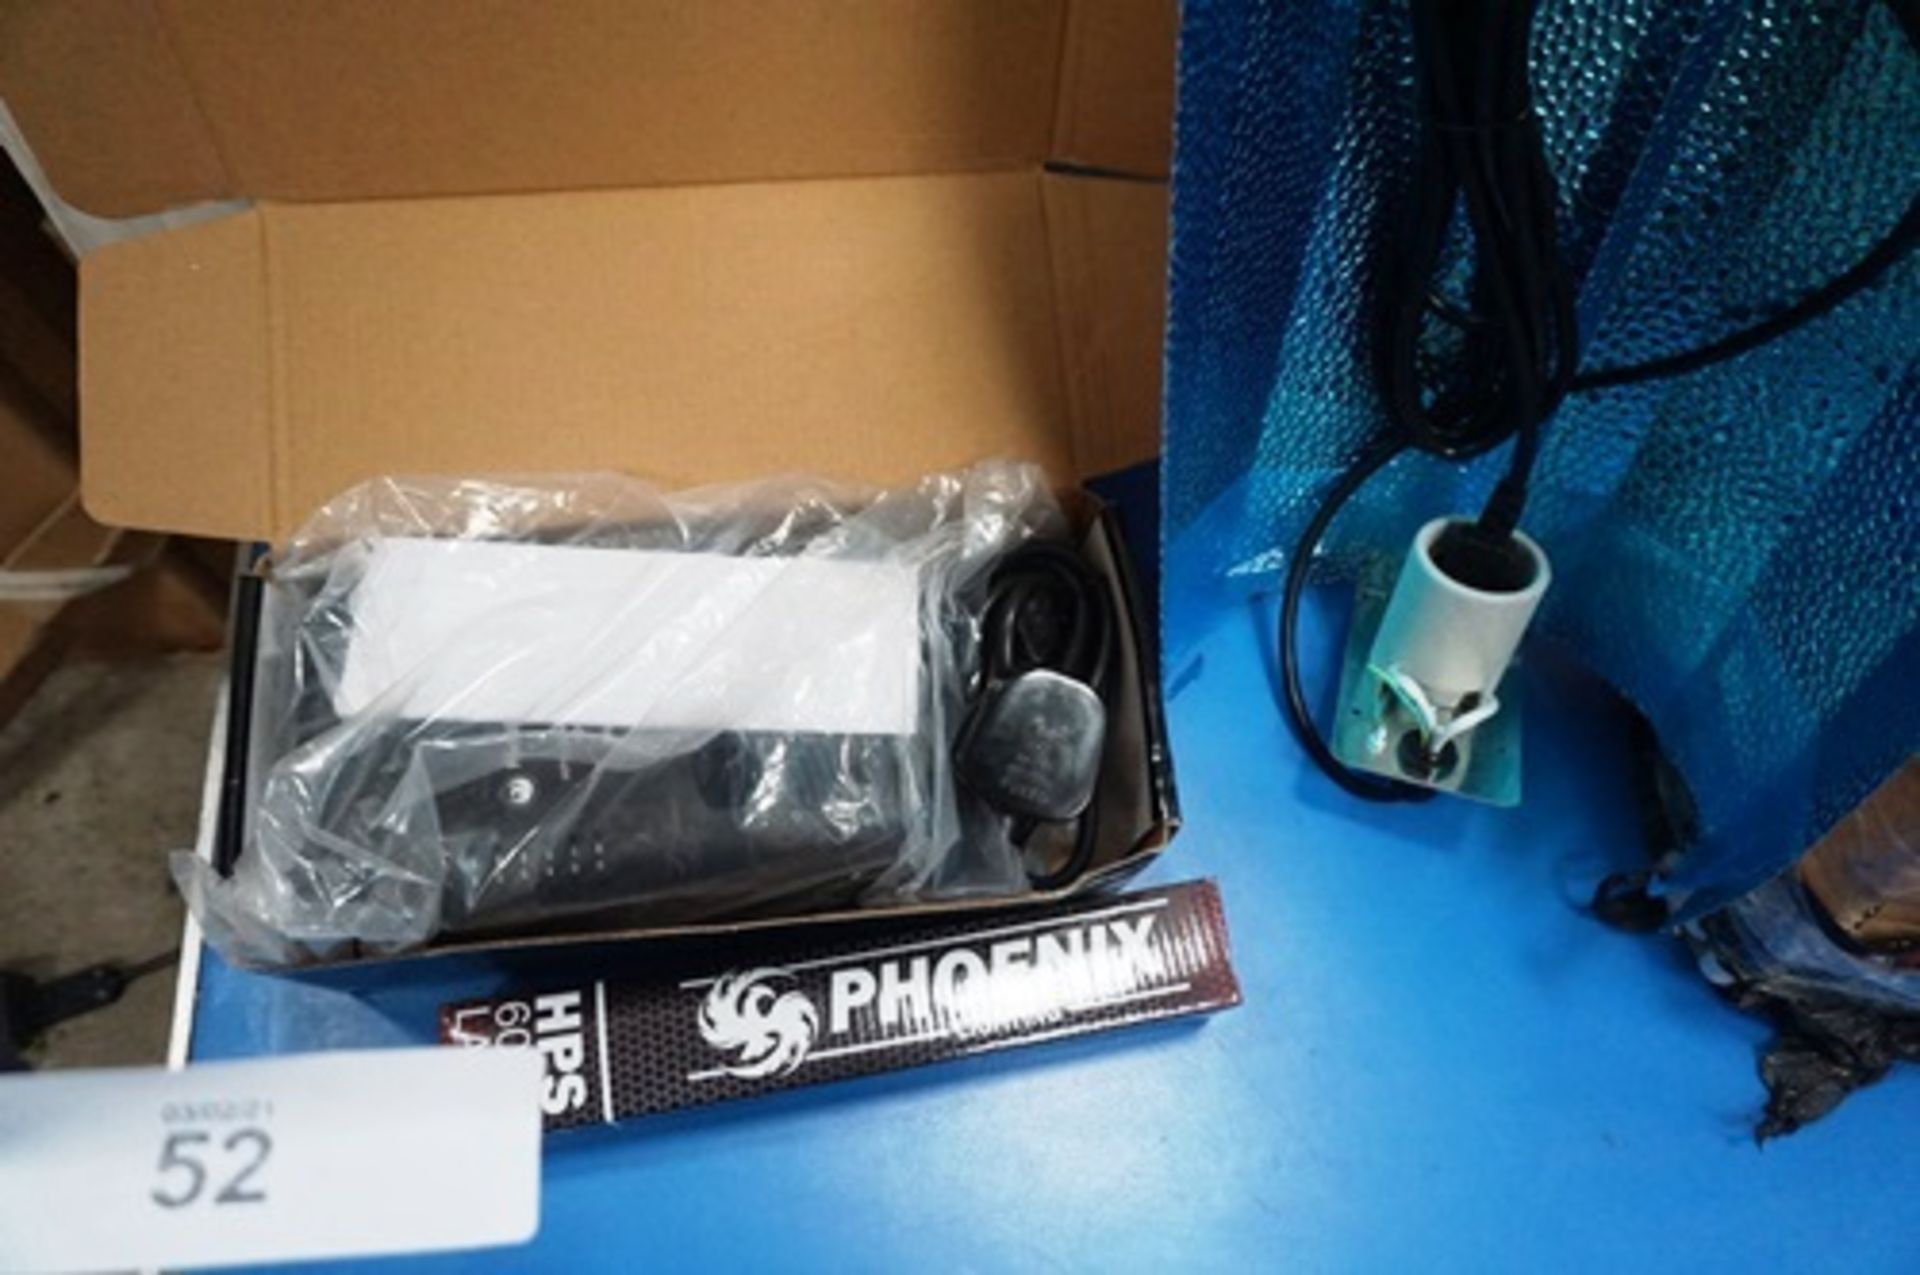 A Phoenix 600W magnetic ballast growing light, and a fabric growing tent, new in box, box open, - Image 2 of 4